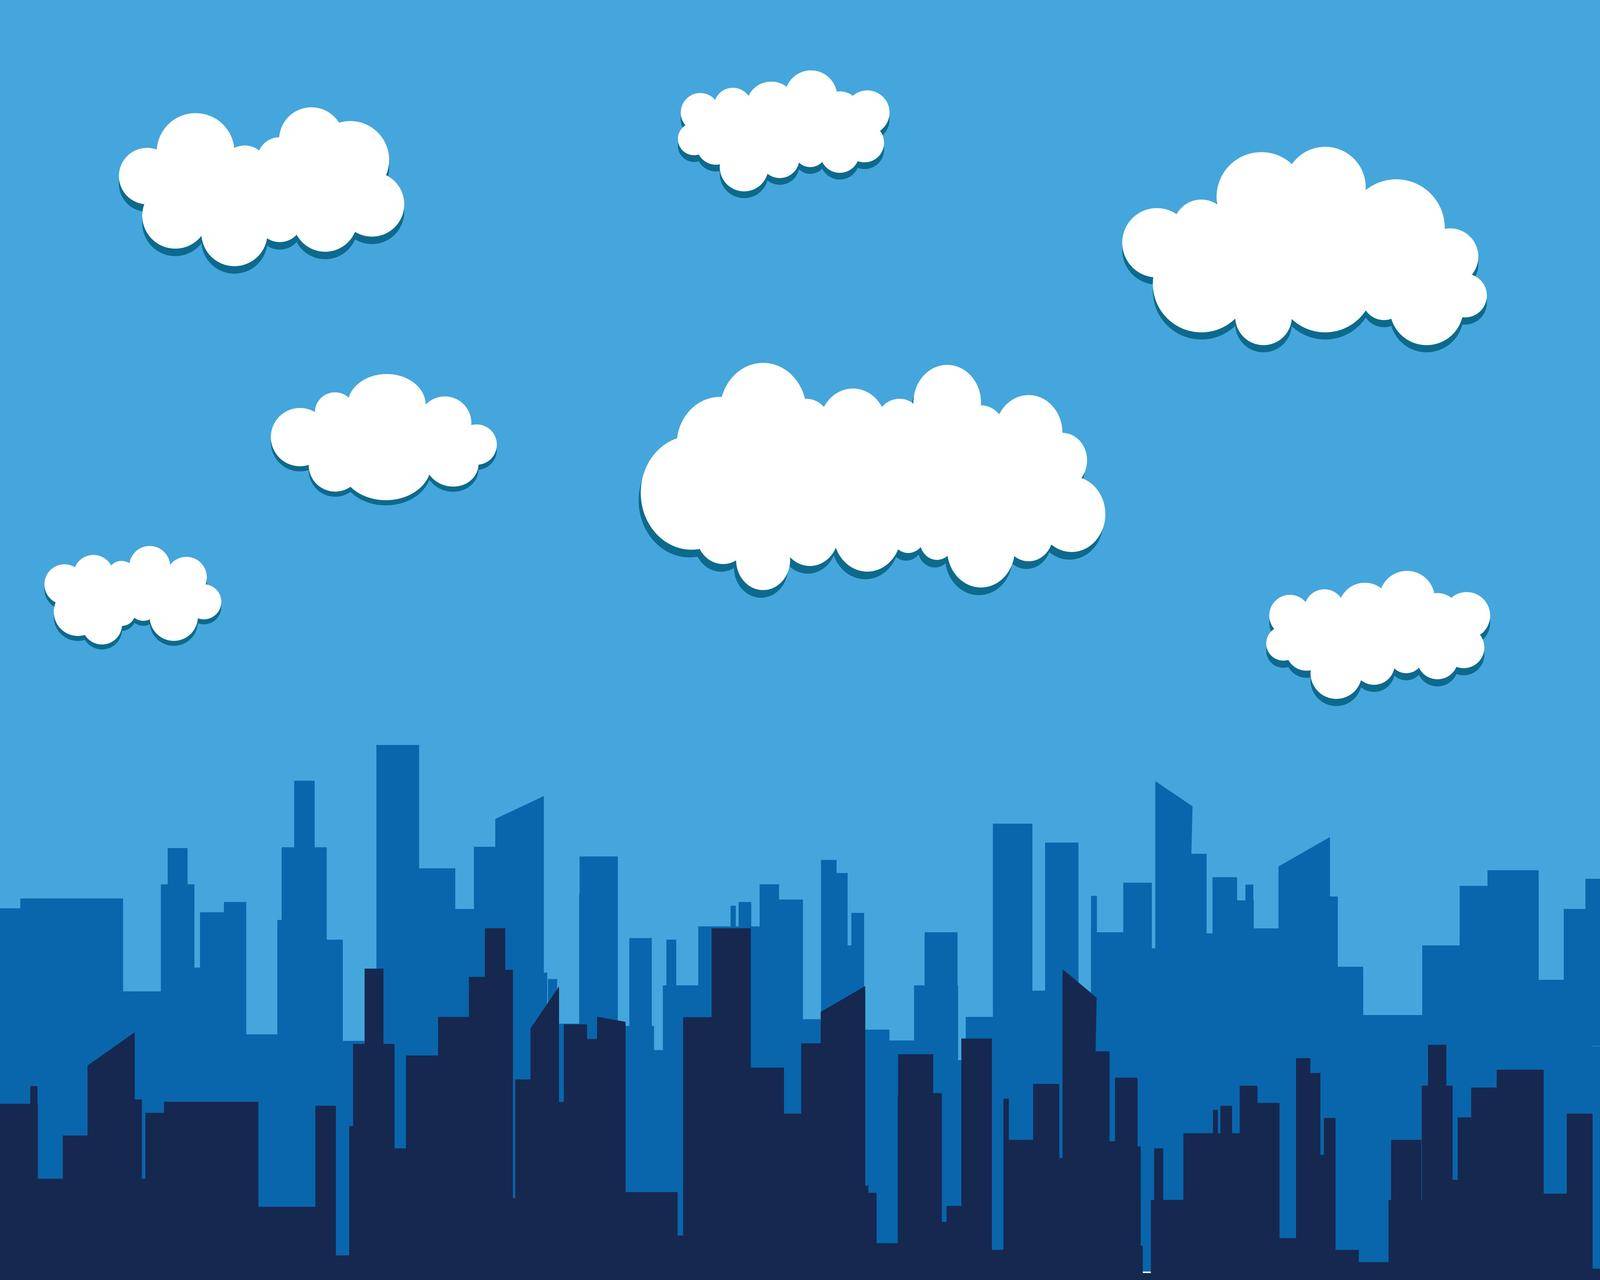 Blue sky with cloud icon illustration by ichadsgn